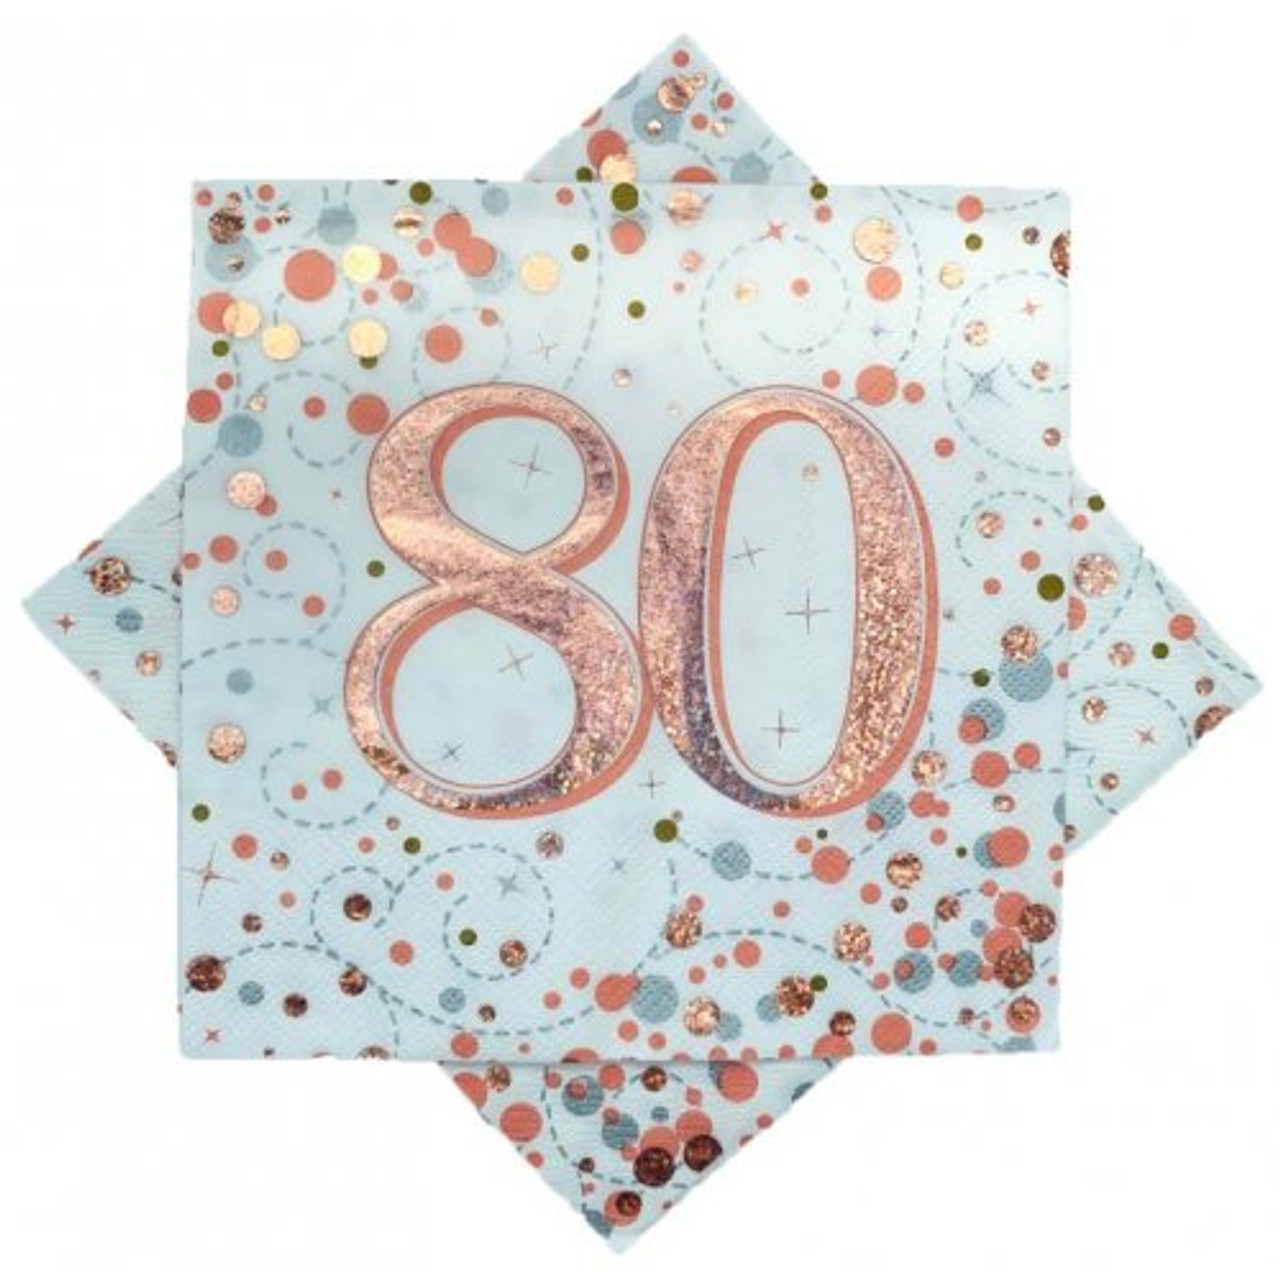 SPARKLING FIZZ ROSE GOLD 80TH BIRTHDAY NAPKINS PACK 16  Code 635845